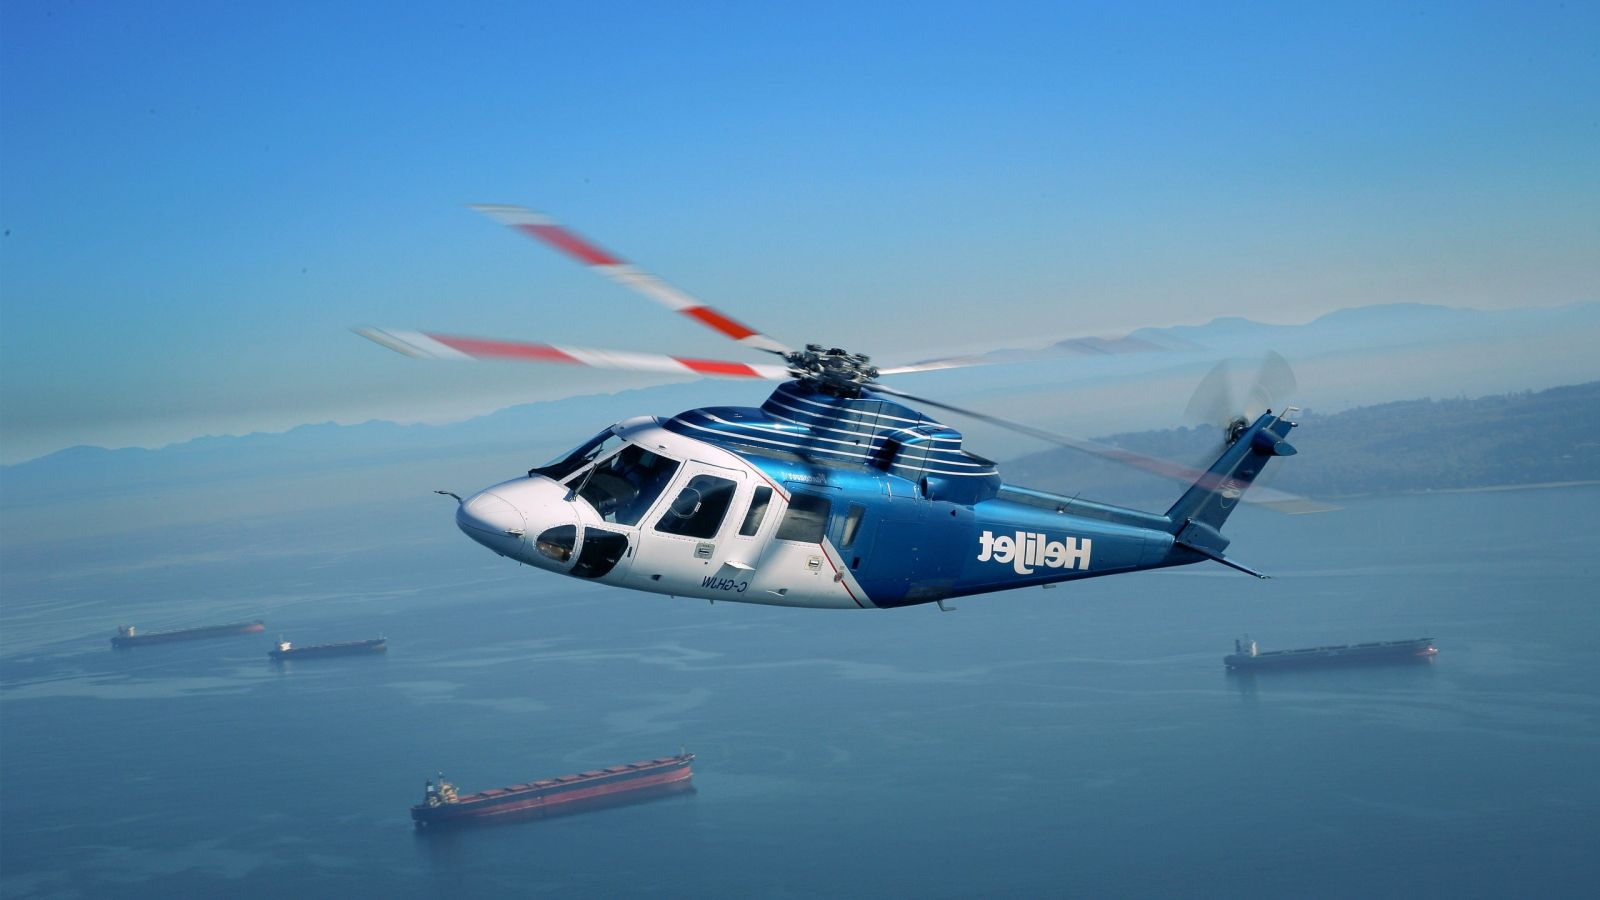 HD Helicopter Wallpaper